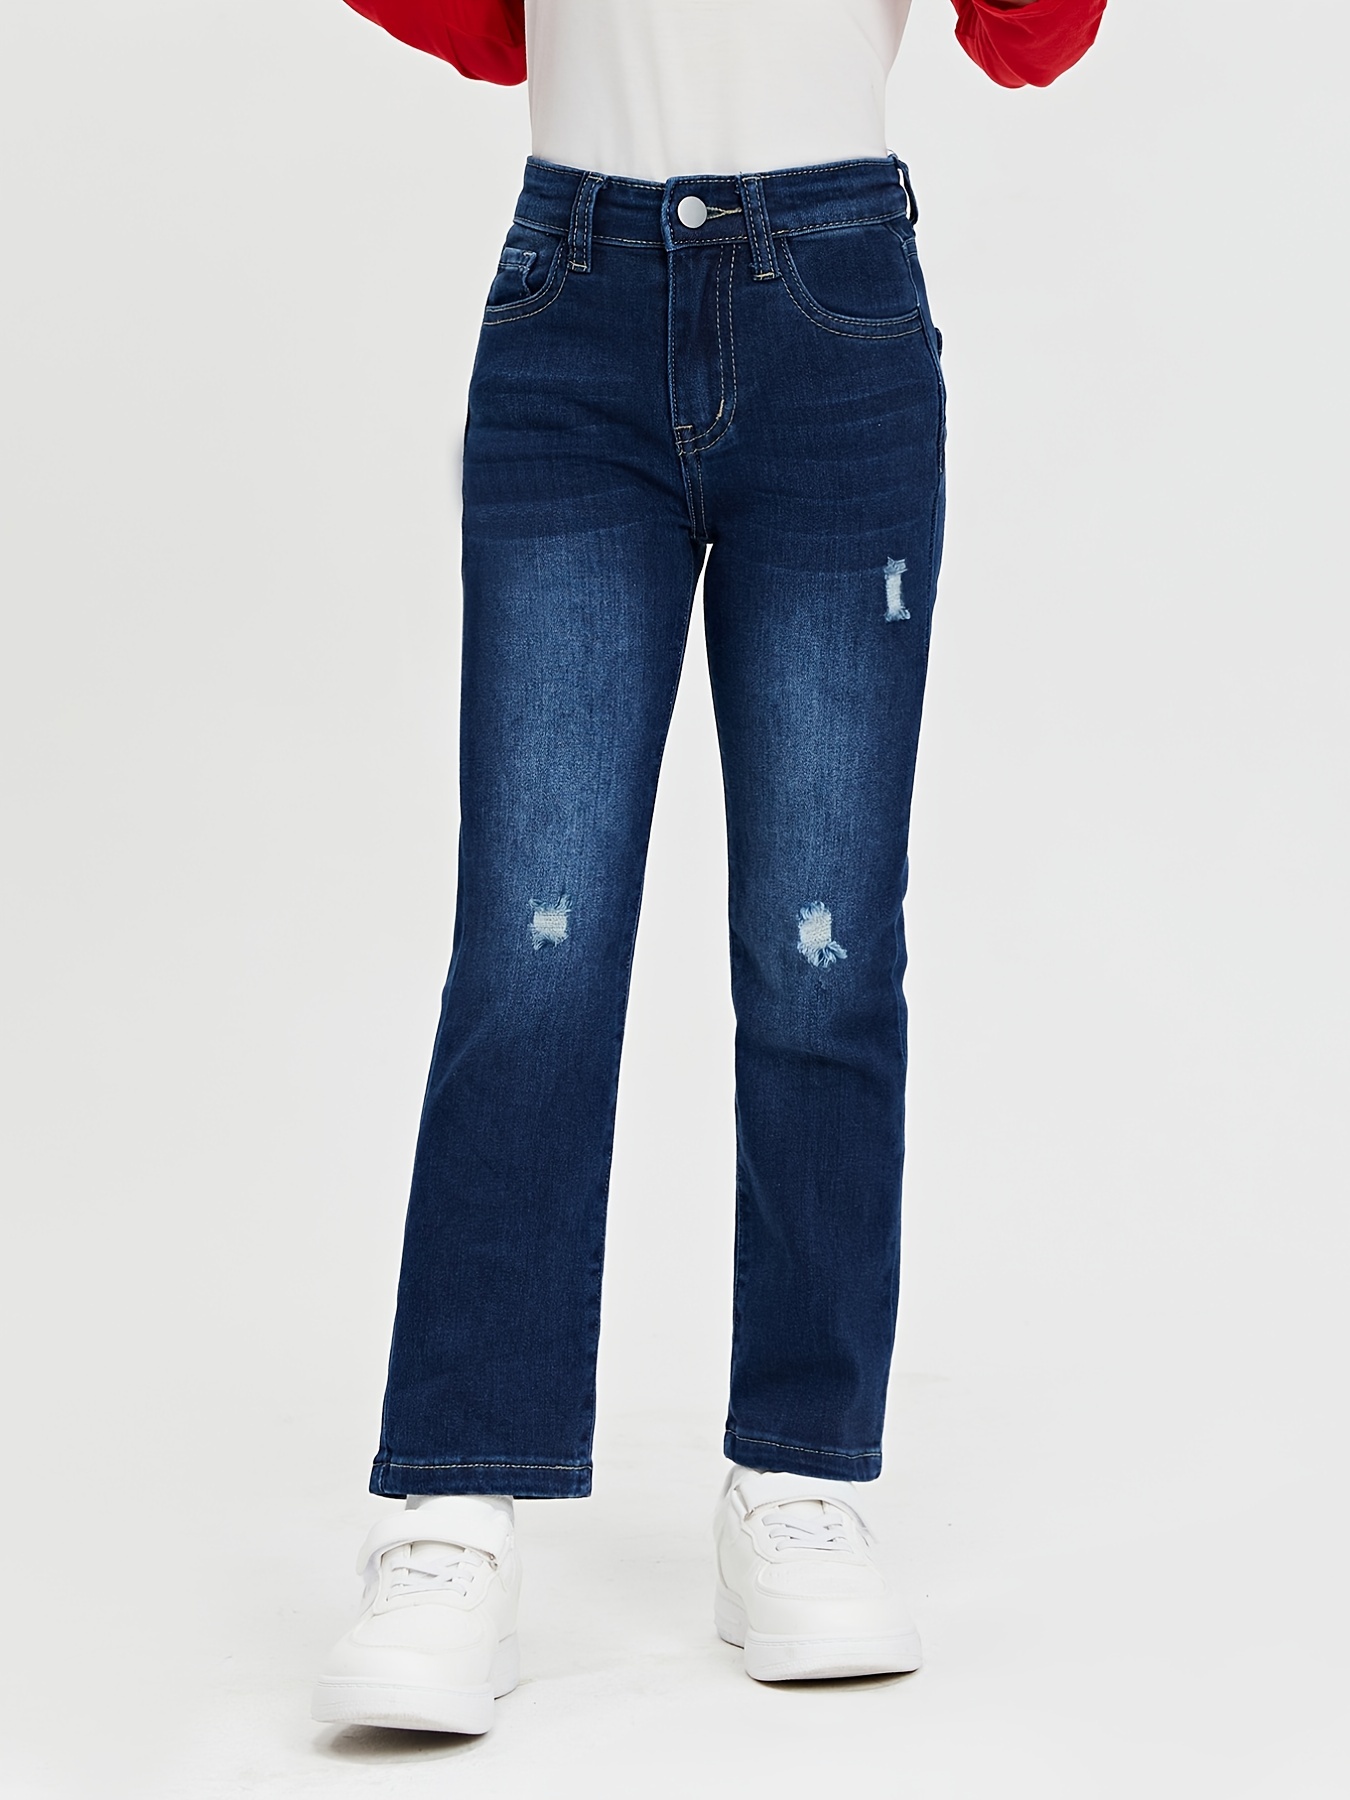 Straight Leg Jeans Outfit Casual